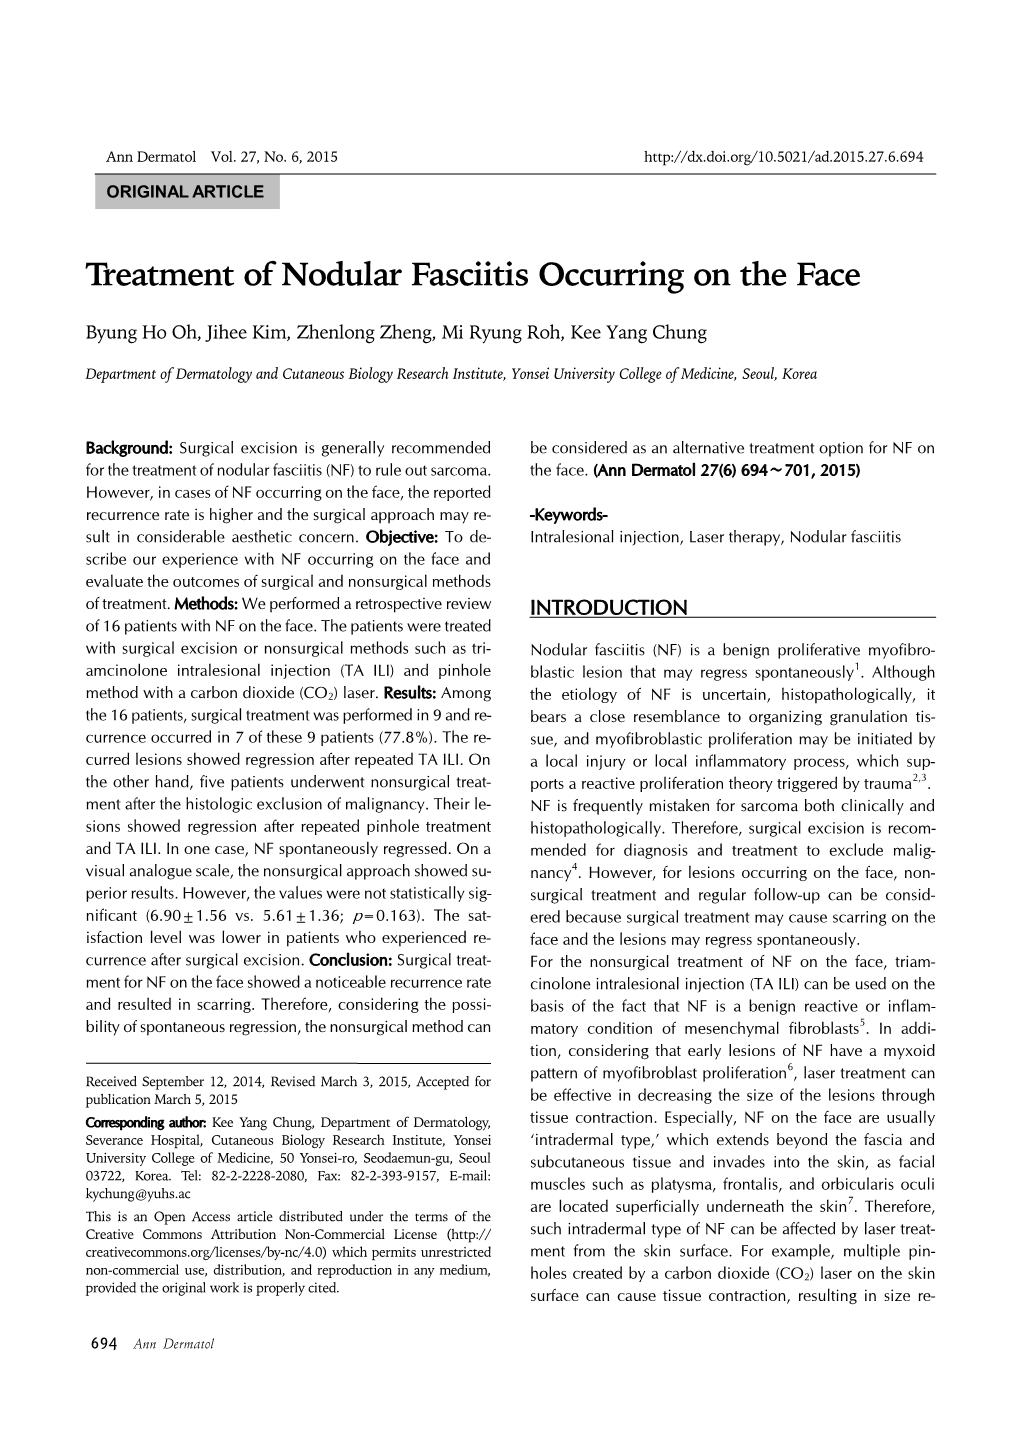 Treatment of Nodular Fasciitis Occurring on the Face